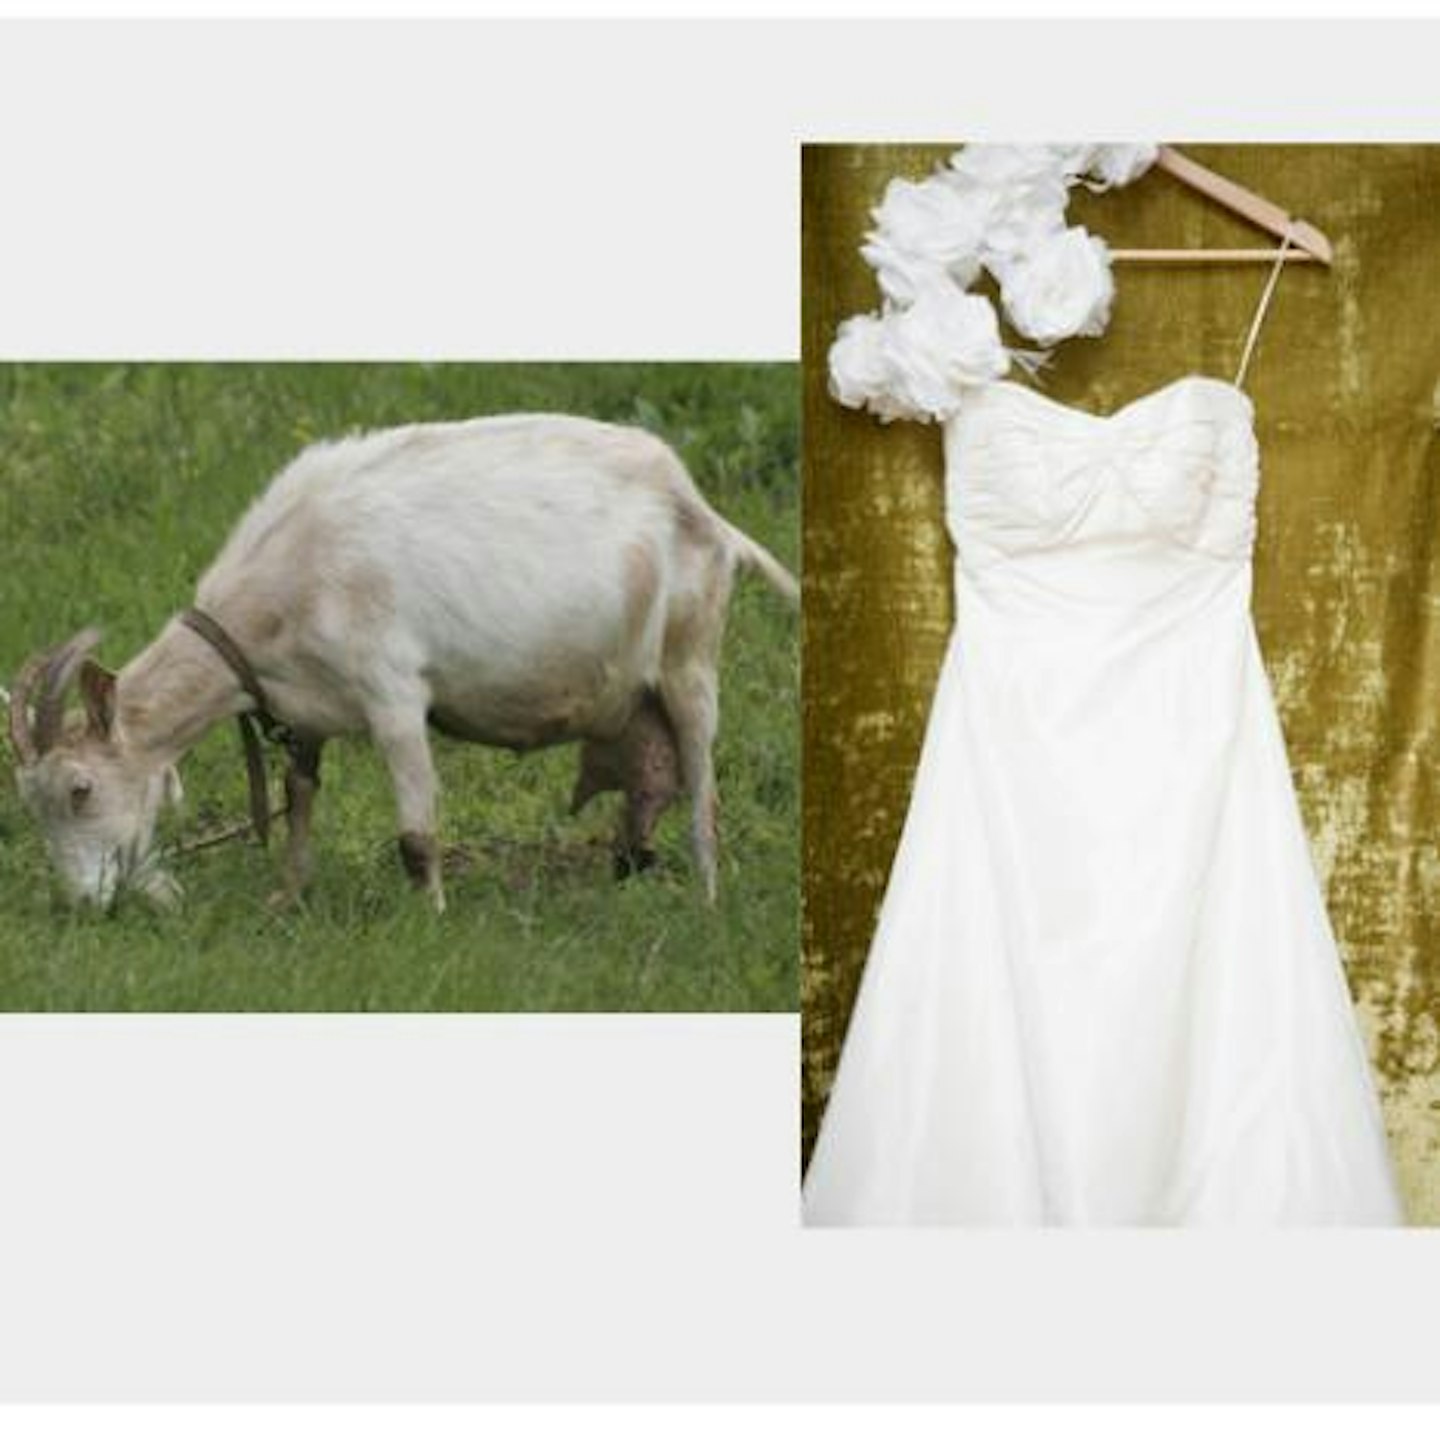 A man is set to marry his pet goat